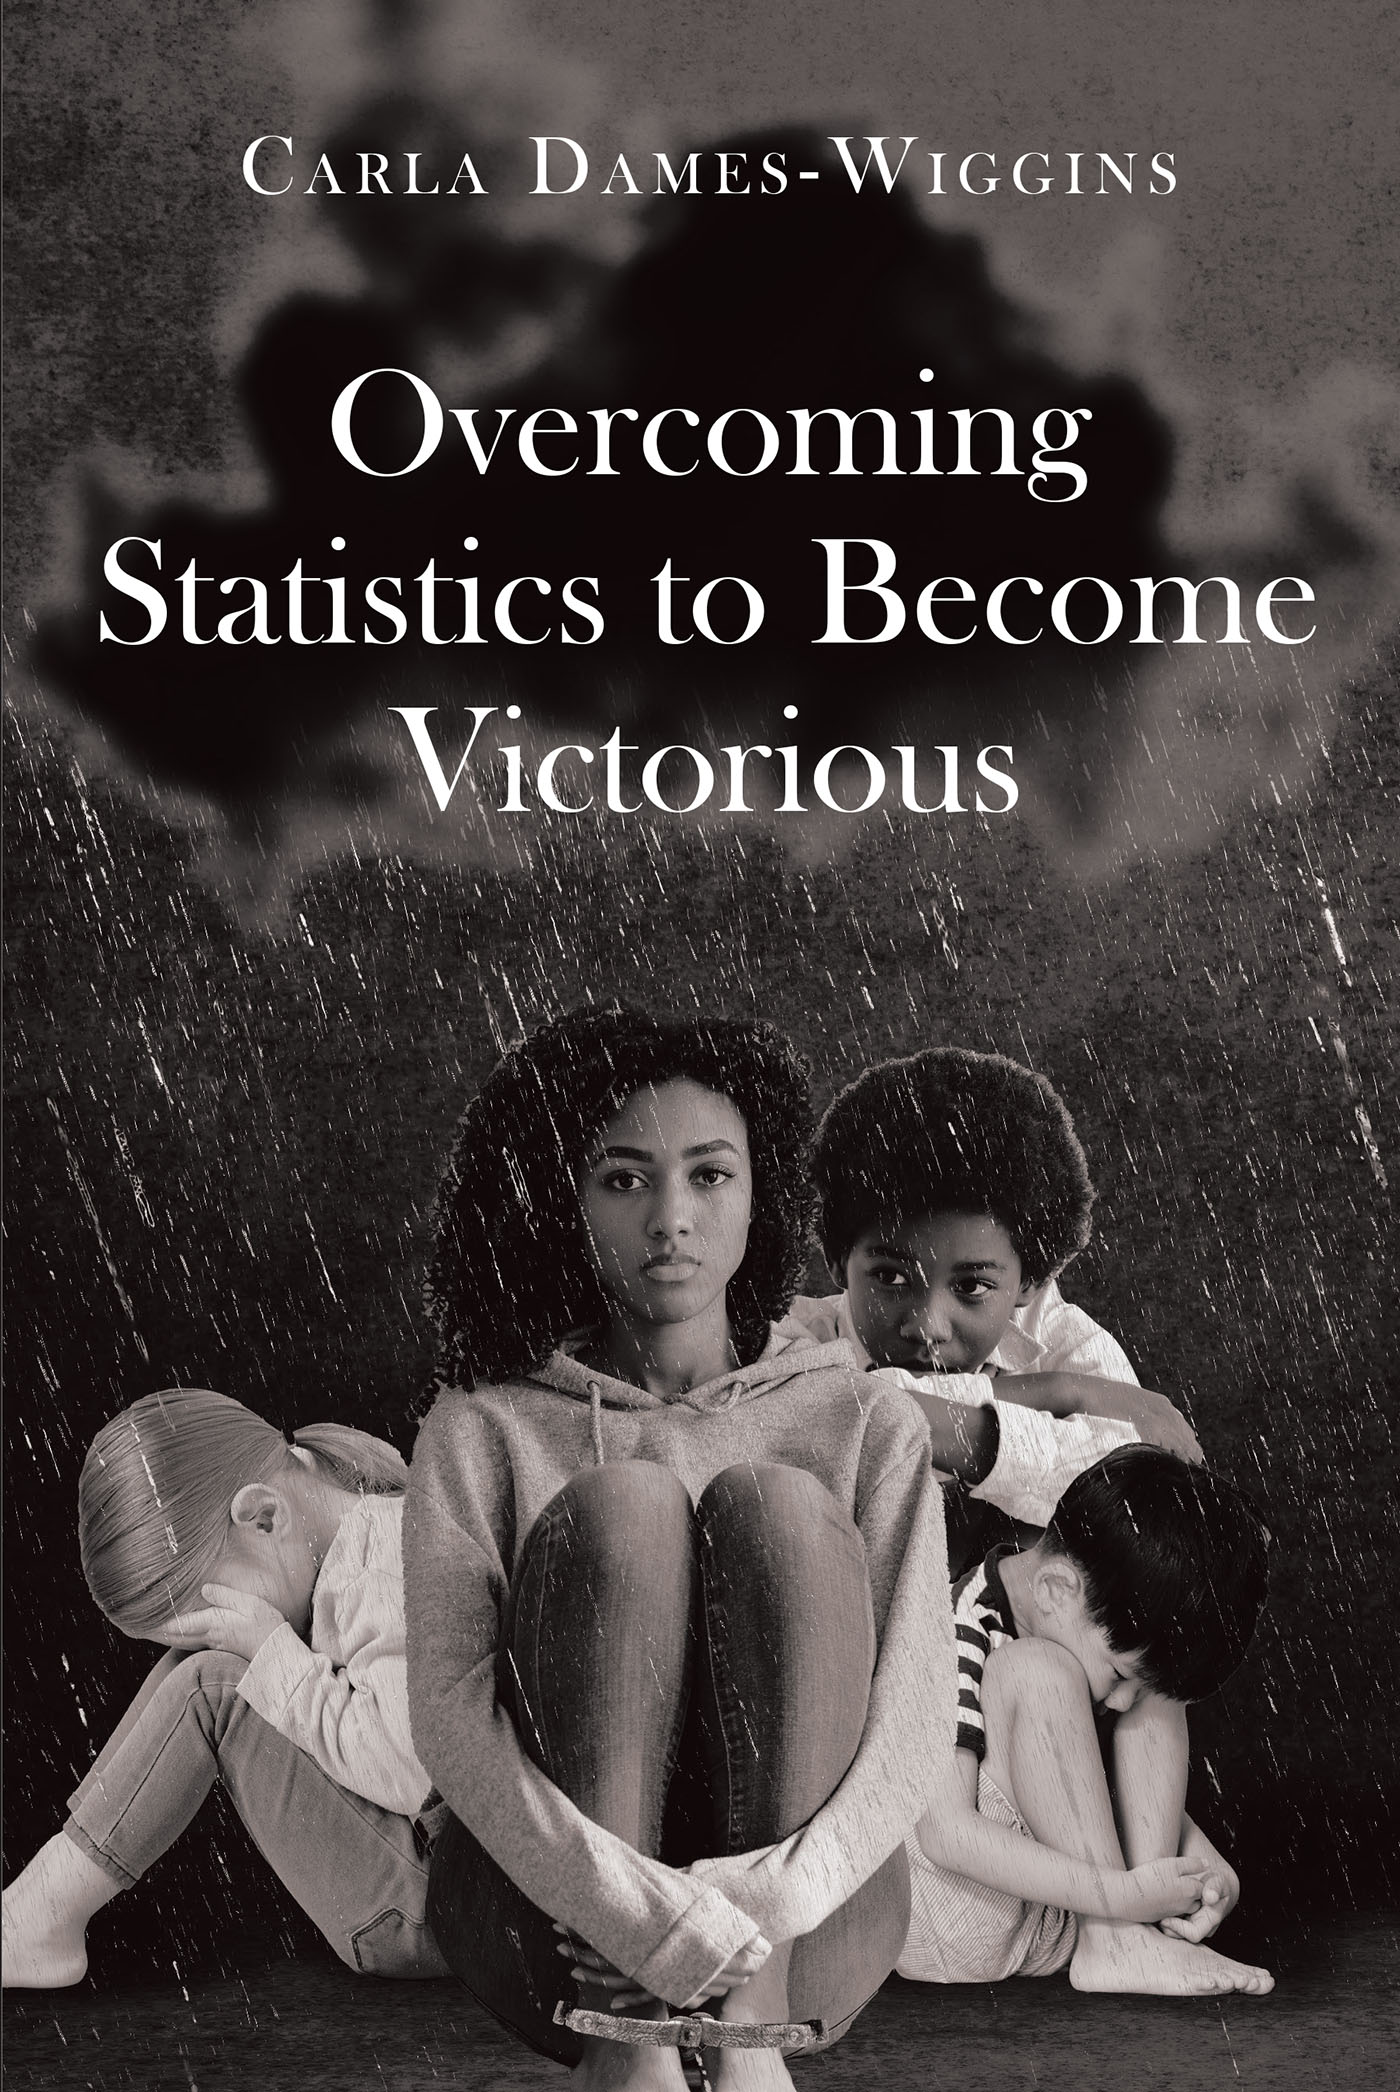 Author Carla Dames-Wiggins’s New Book, "Overcoming Statistics to Become Victorious," is an Inspirational Memoir That Shares the Author’s Journey of Overcoming Obstacles